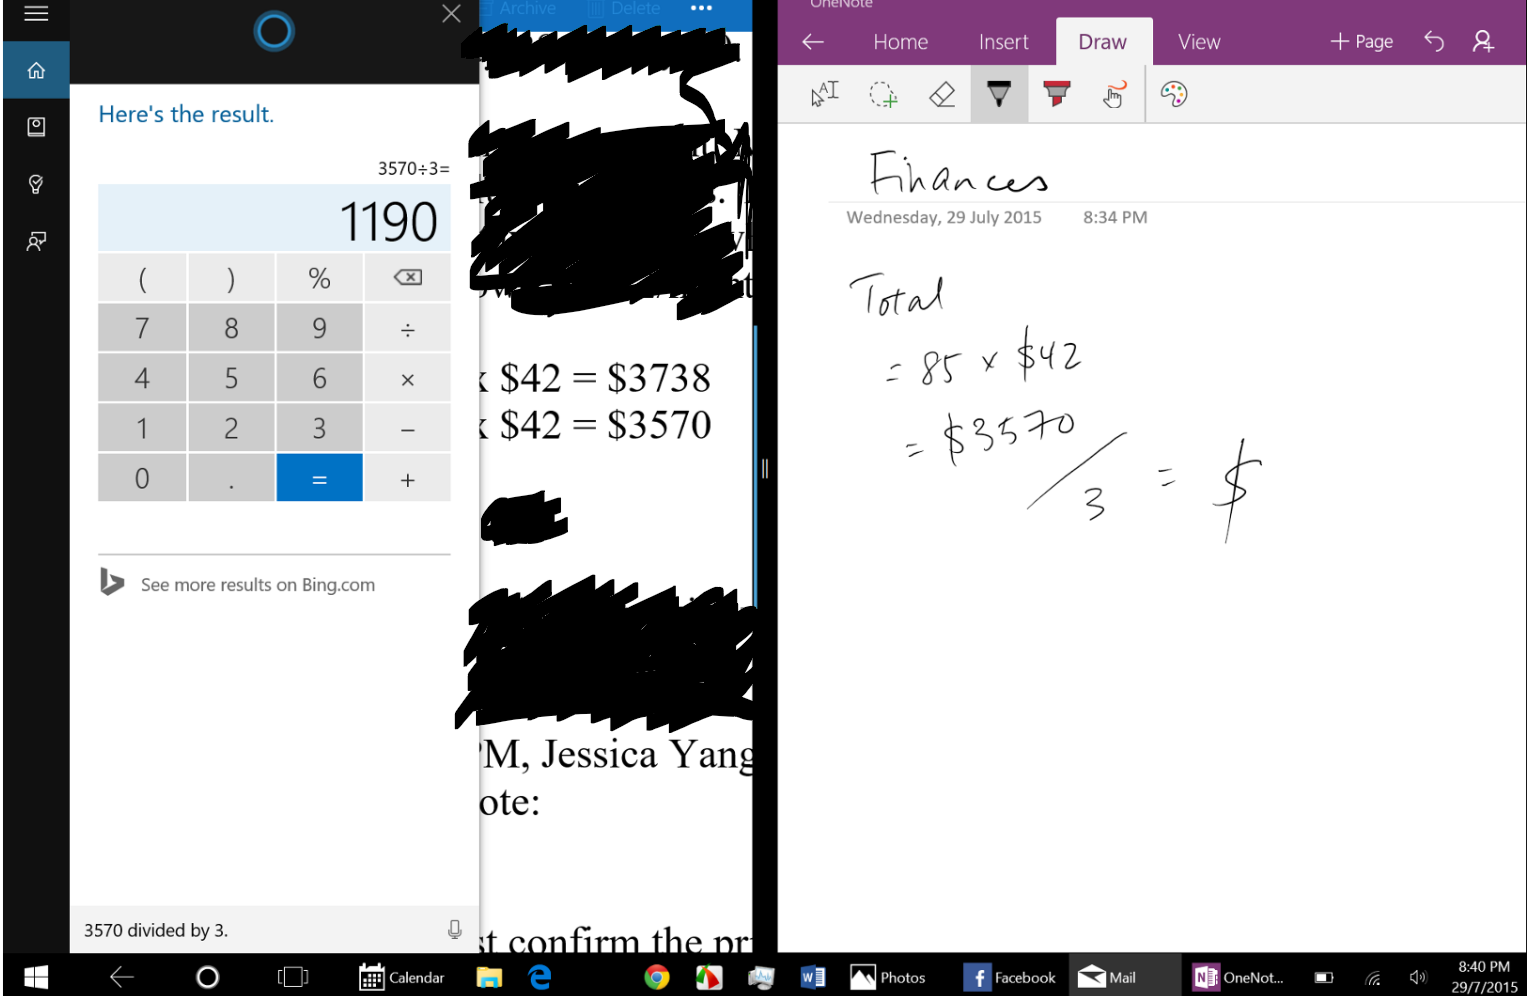 Windows 10 being used for actual notes, featuring Mail, OneNote and Cortana.